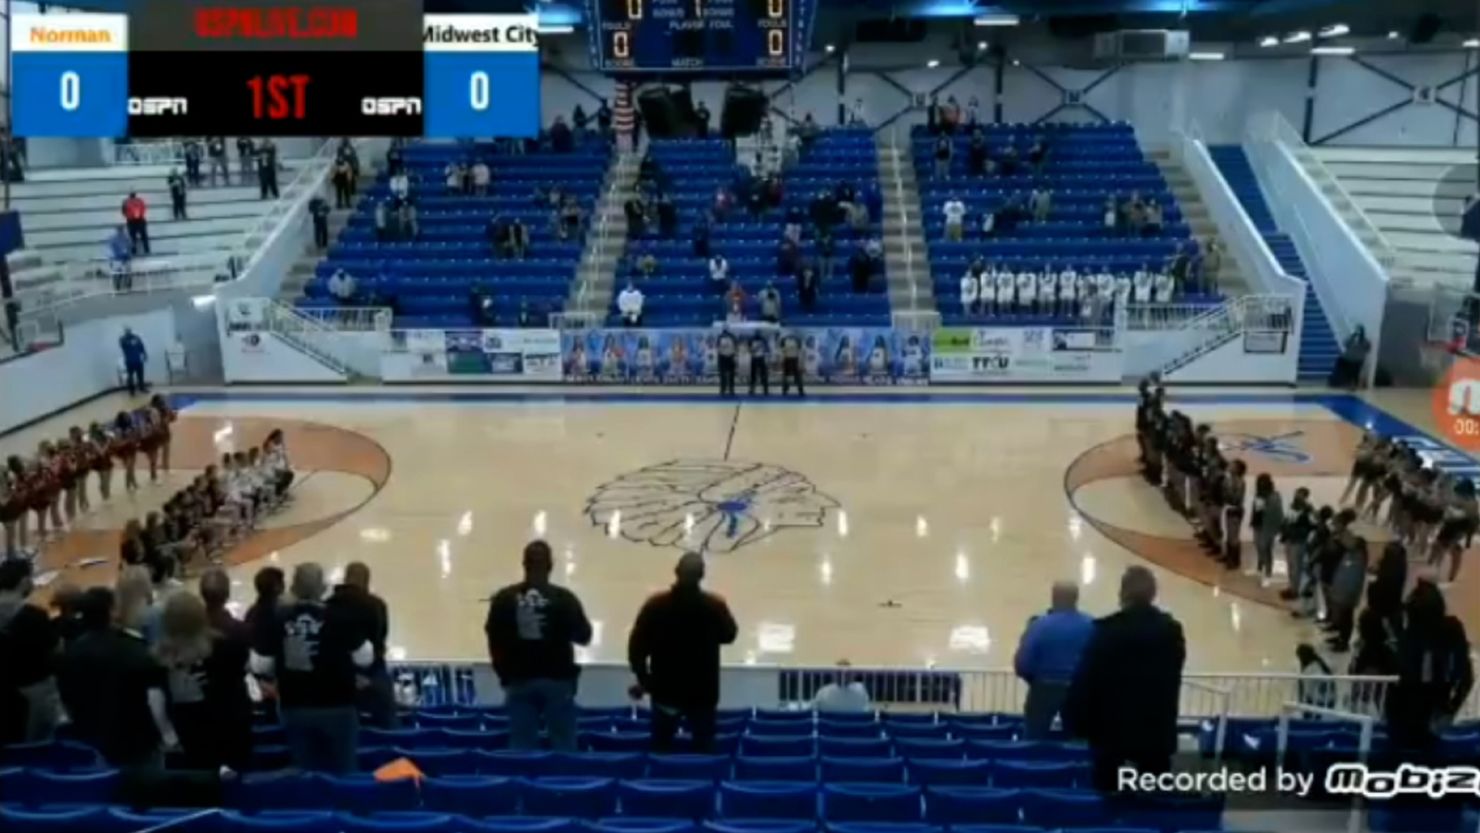 A screenshot of video streamed by the NFHS network shows the Norman High School girls basketball team kneeling during the National Anthem before a playoff game in Oklahoma. An announcer for the online broadcast made racist comments about the team as they players kneeled. 